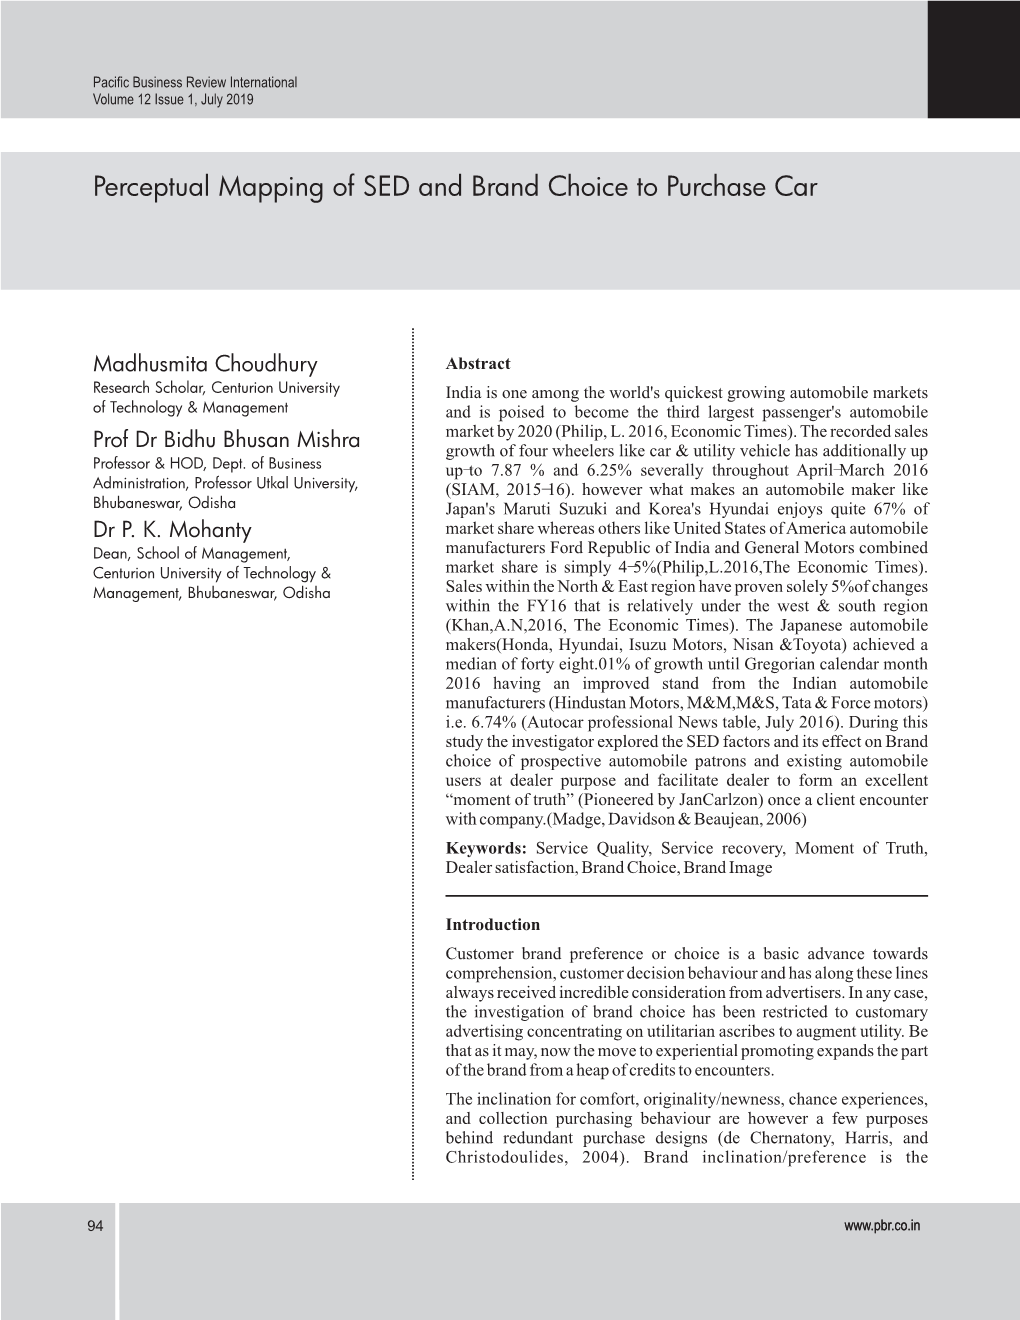 Perceptual Mapping of SED and Brand Choice to Purchase Car